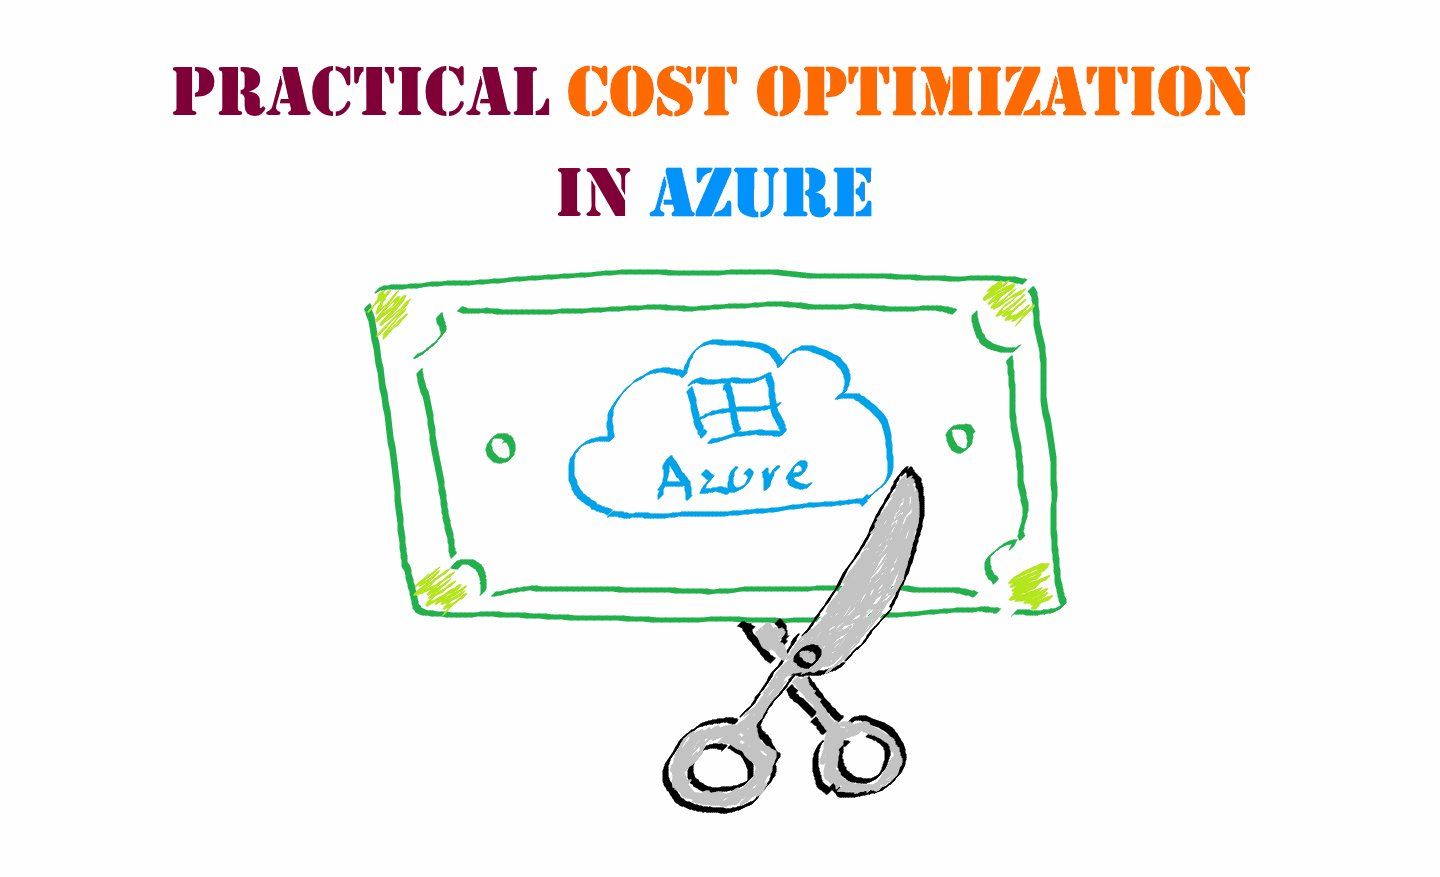 Practical use cases of cost optimization in Azure